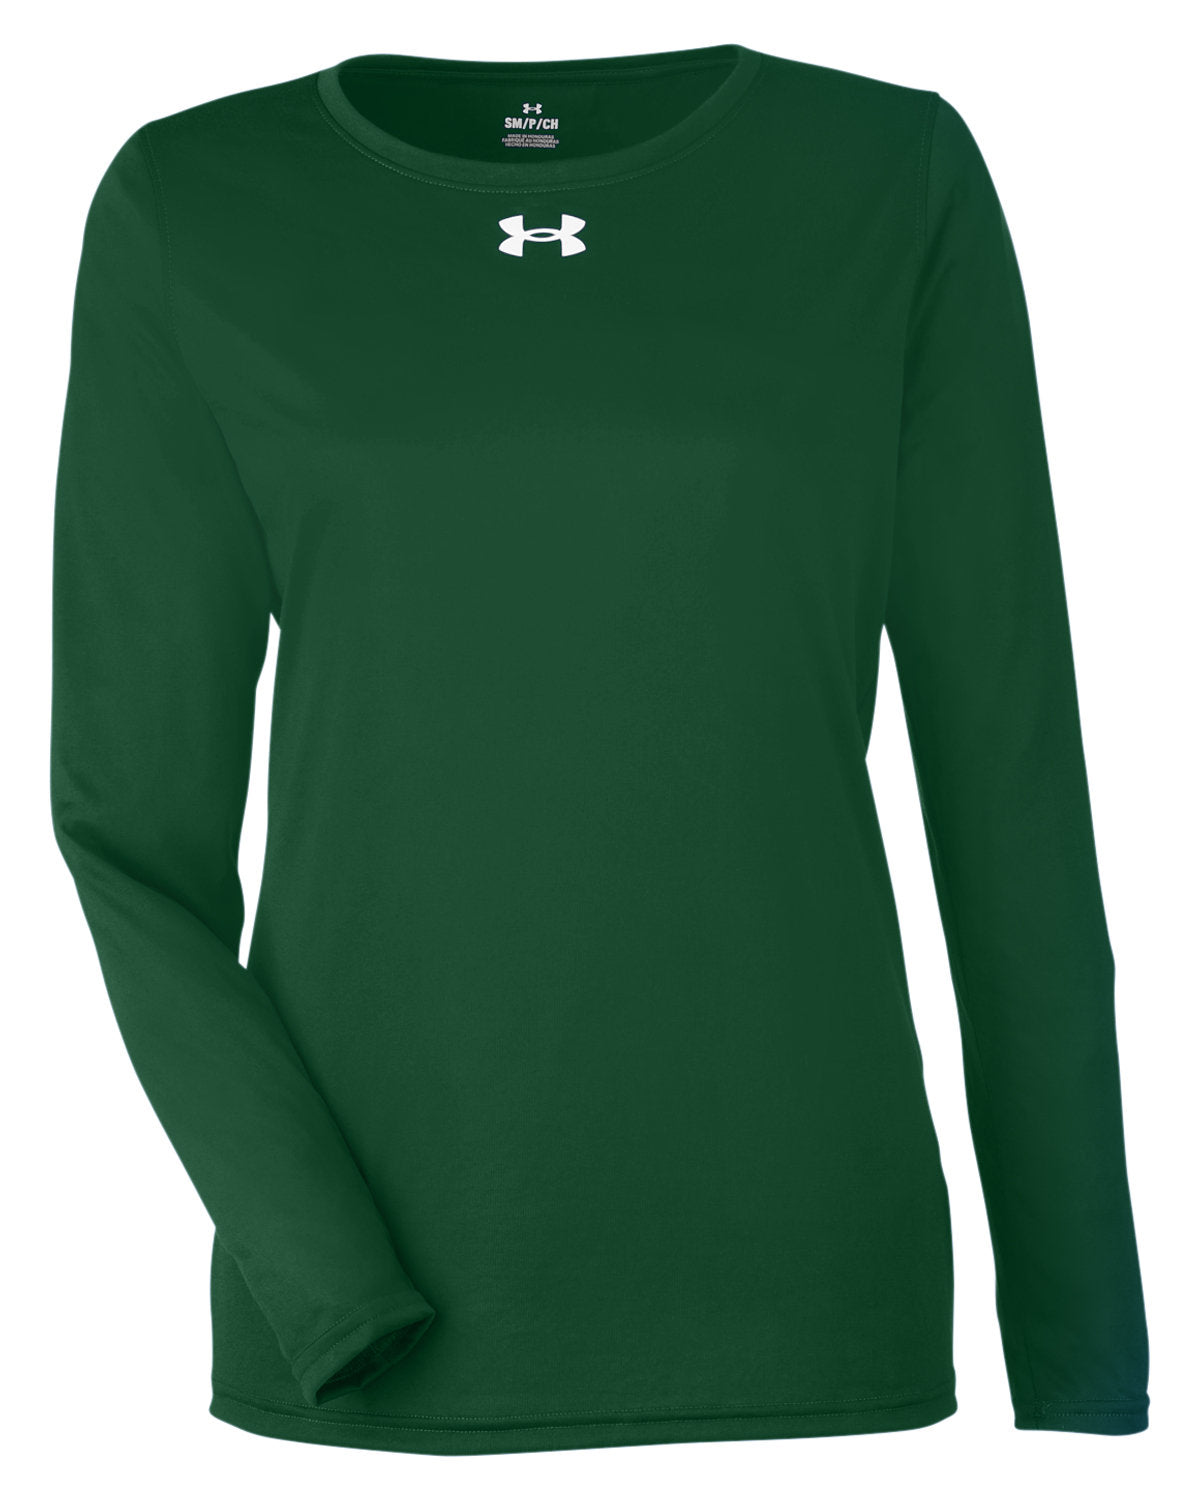 Under Armour Ladies Team Tech Long-Sleeve T-Shirt with Custom Embroidery, 1376852